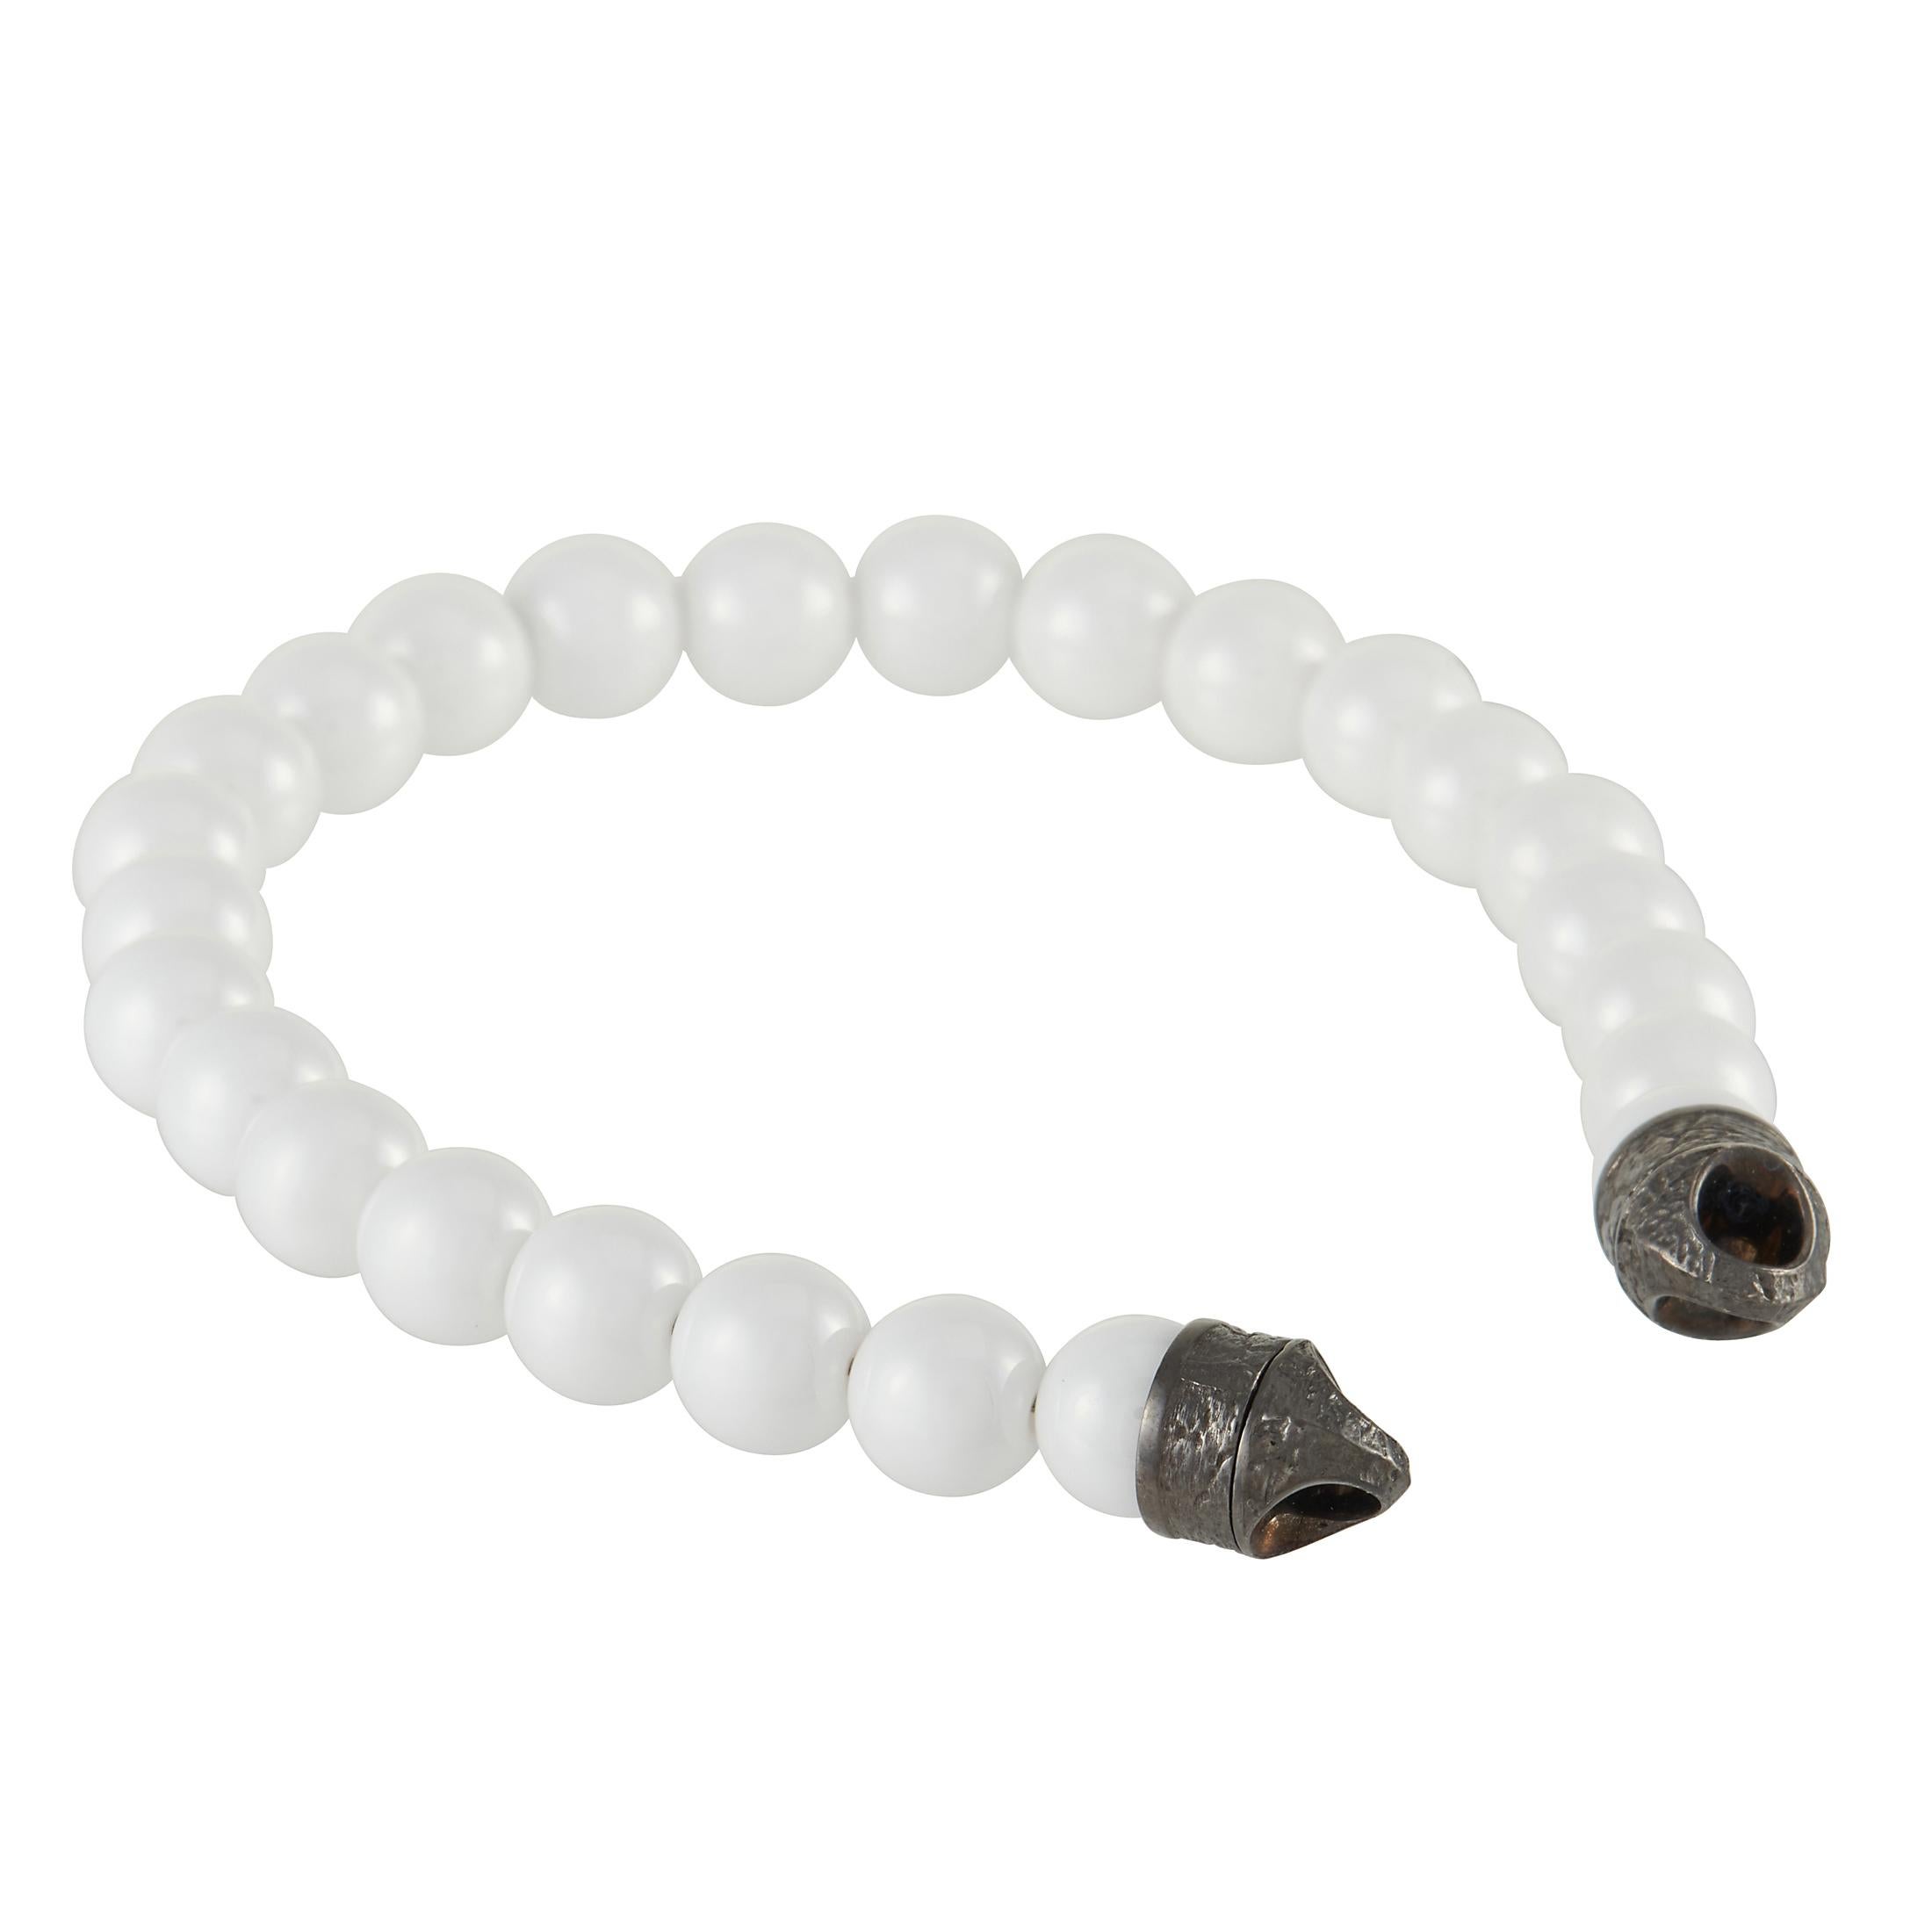 There’s something crisp, cool, and confident about this Stephen Webster England Made Me bracelet. Comprised of white ceramic beads, this minimalist design is devoid of a clasp system. It measures 8” wide and will pair beautifully with any look. 